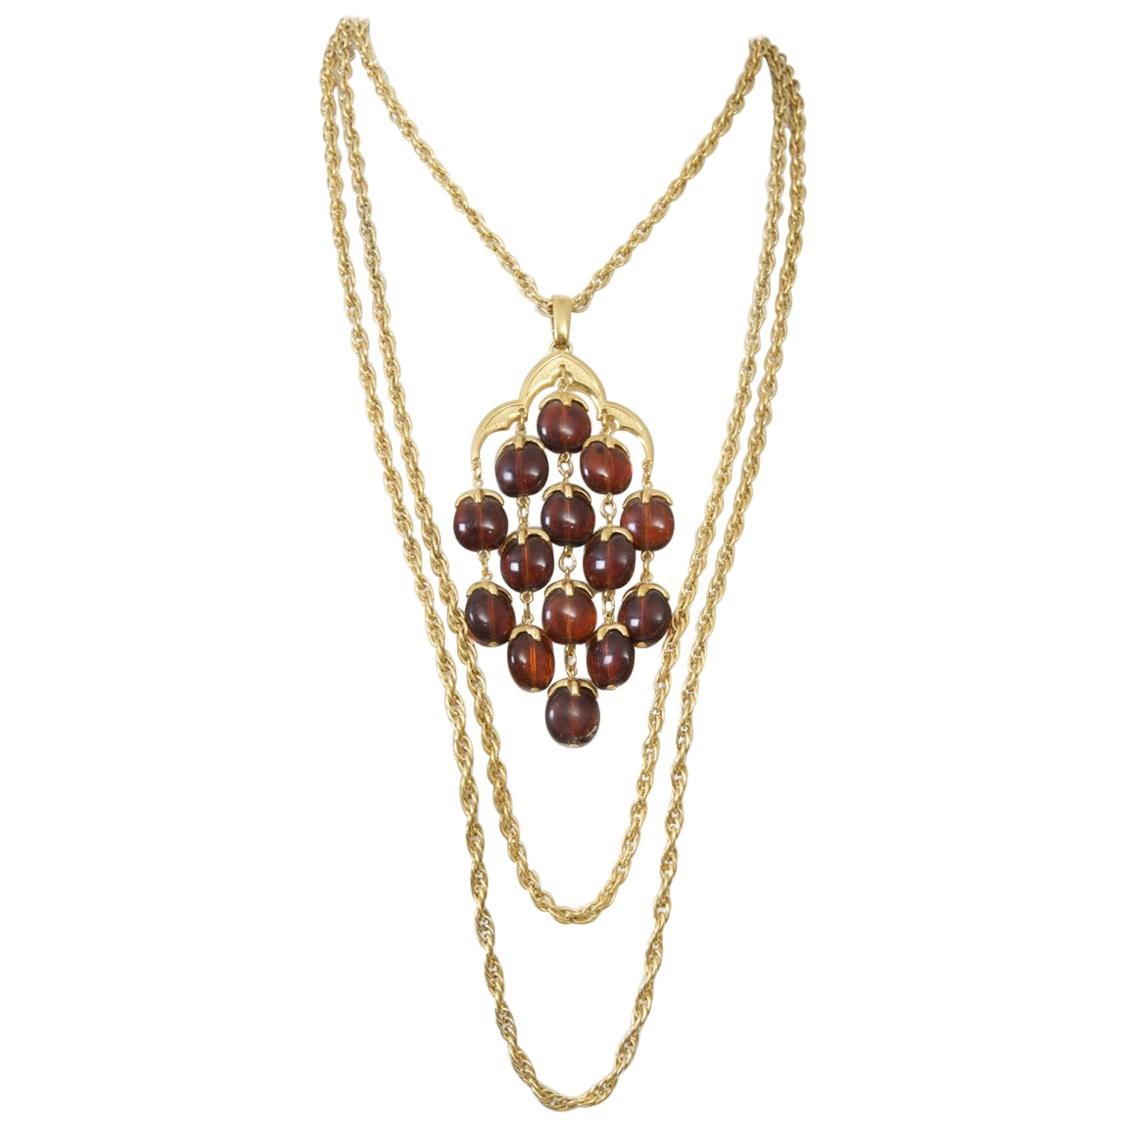 c.1960s-'70s Trifari necklace and earrings set, the necklace comprised of three gold chains, the shortest of which features a large pendant with free-hanging brown translucent stones. The matching chandelier-style earrings are composed of four of